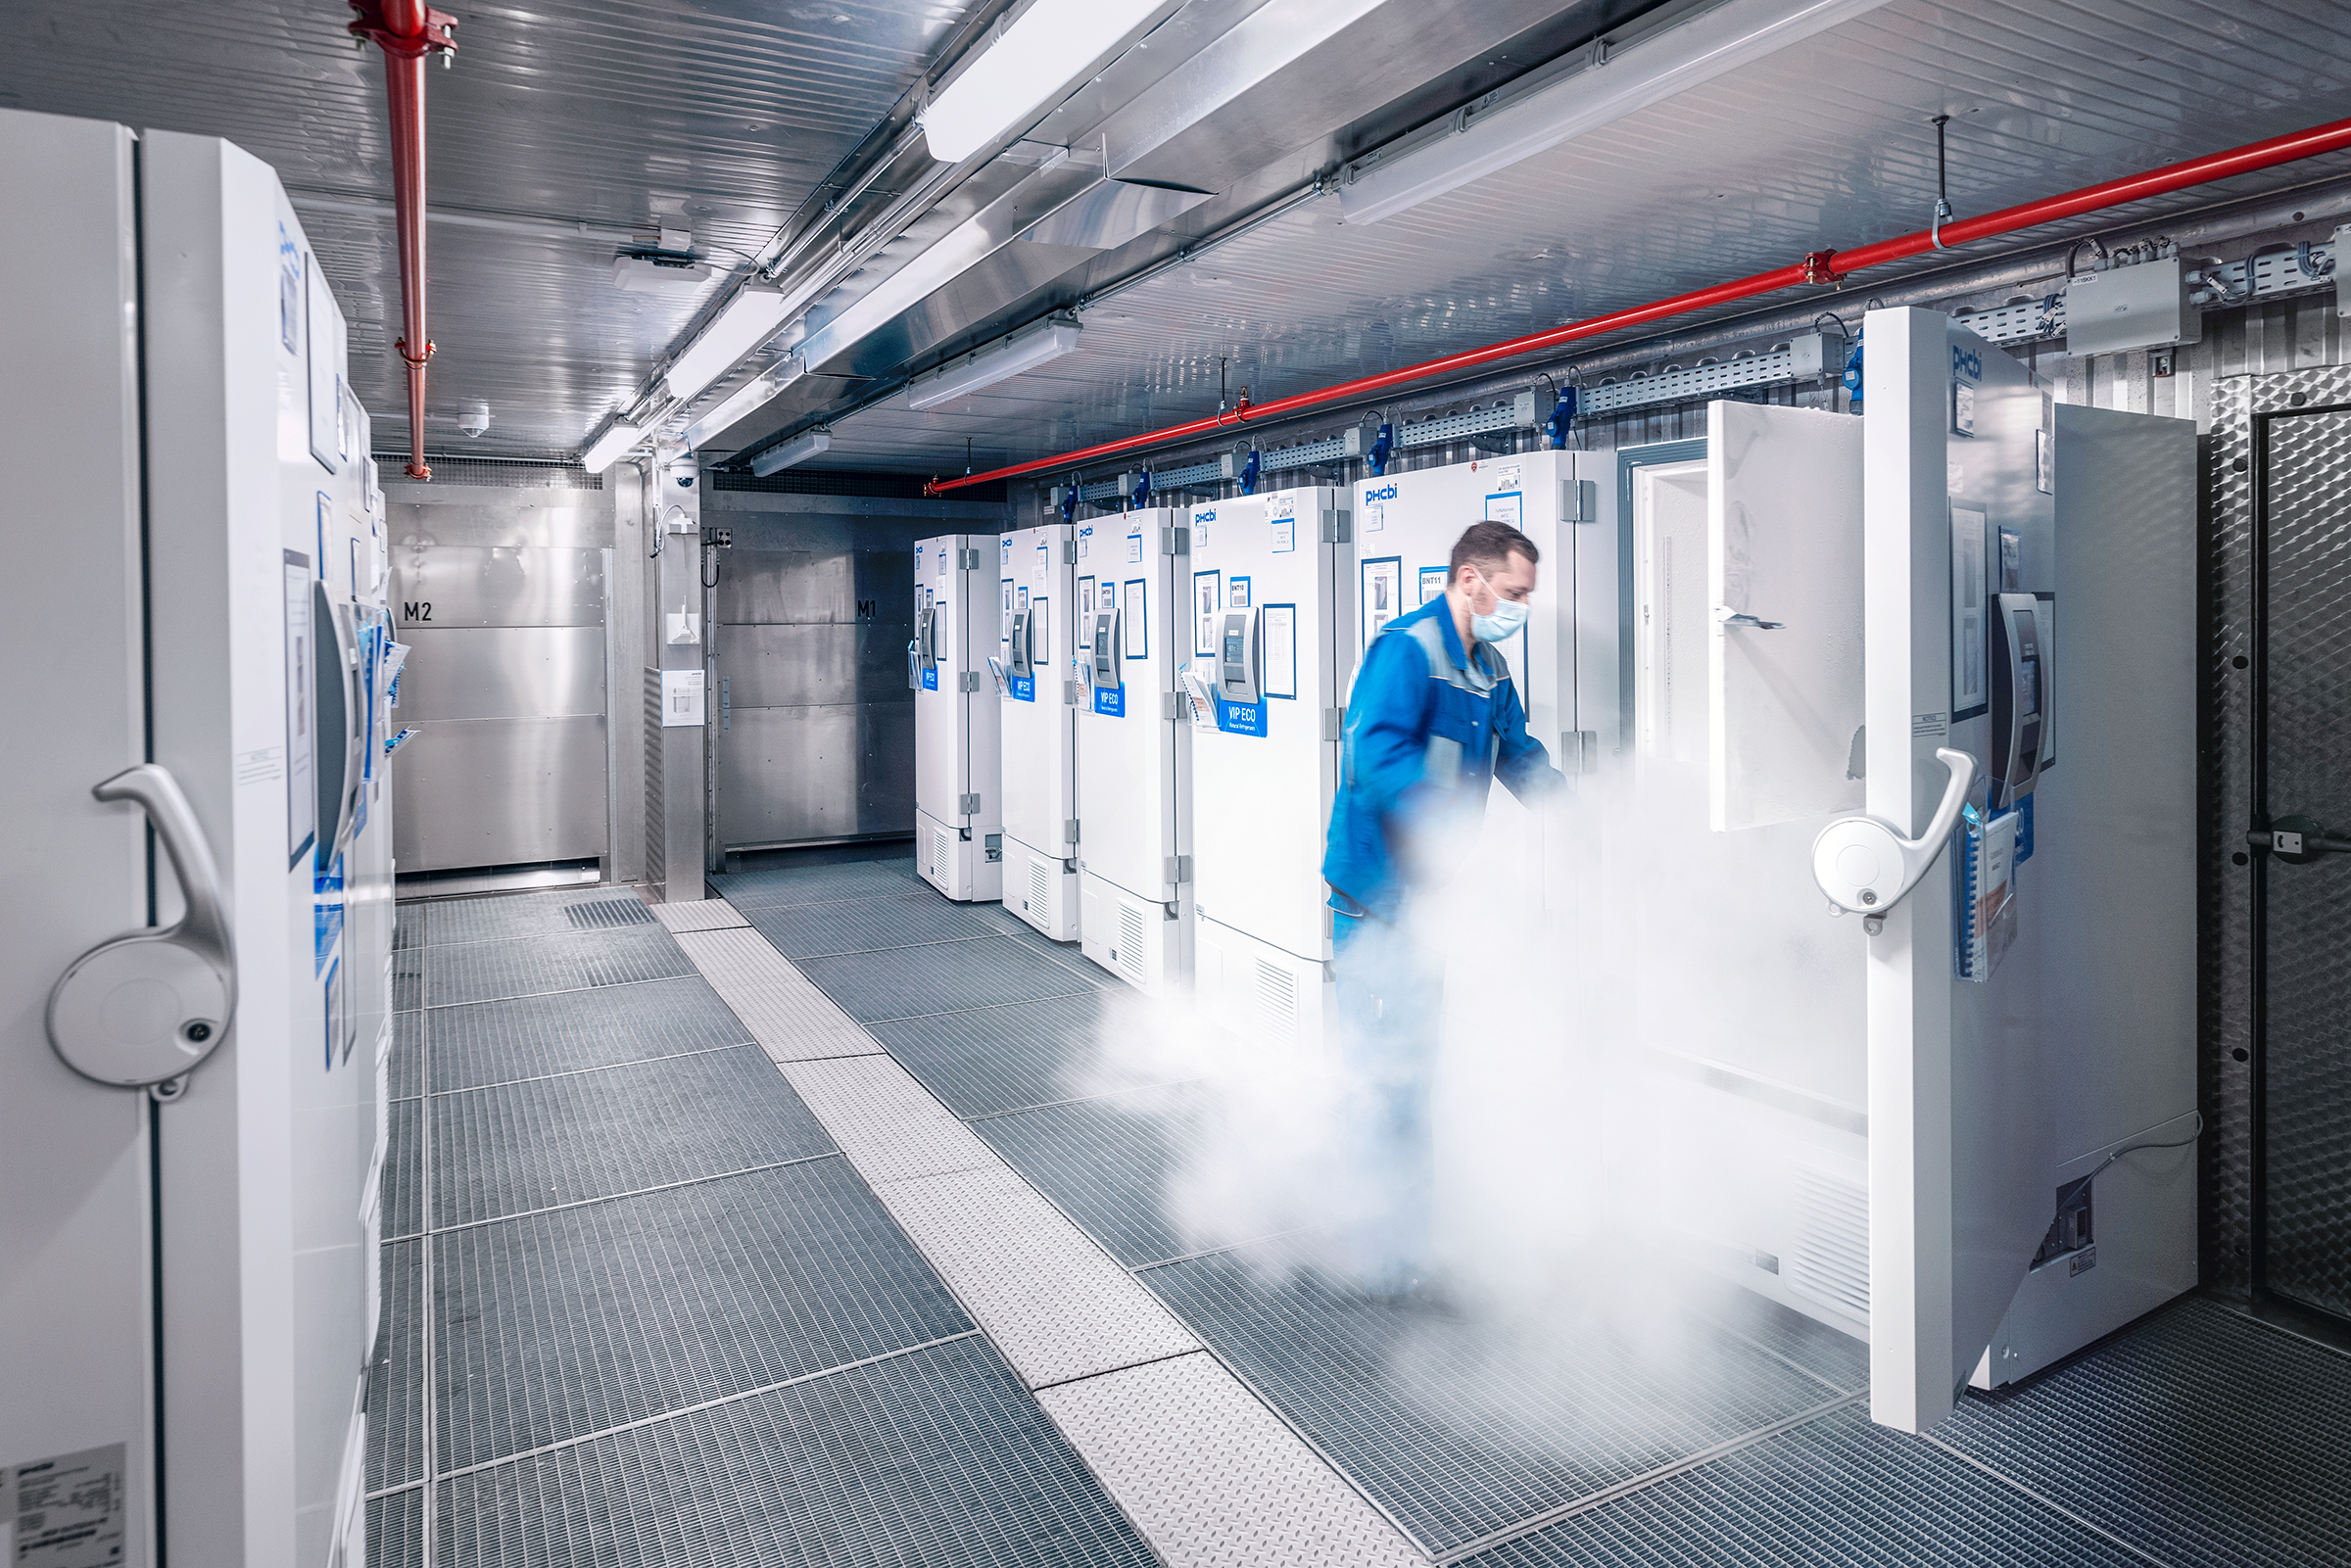 Once bottled, the Pfizer-BioNTech vaccine is stored at -82°C (-116°F) at a filling and labeling facility in Halle.